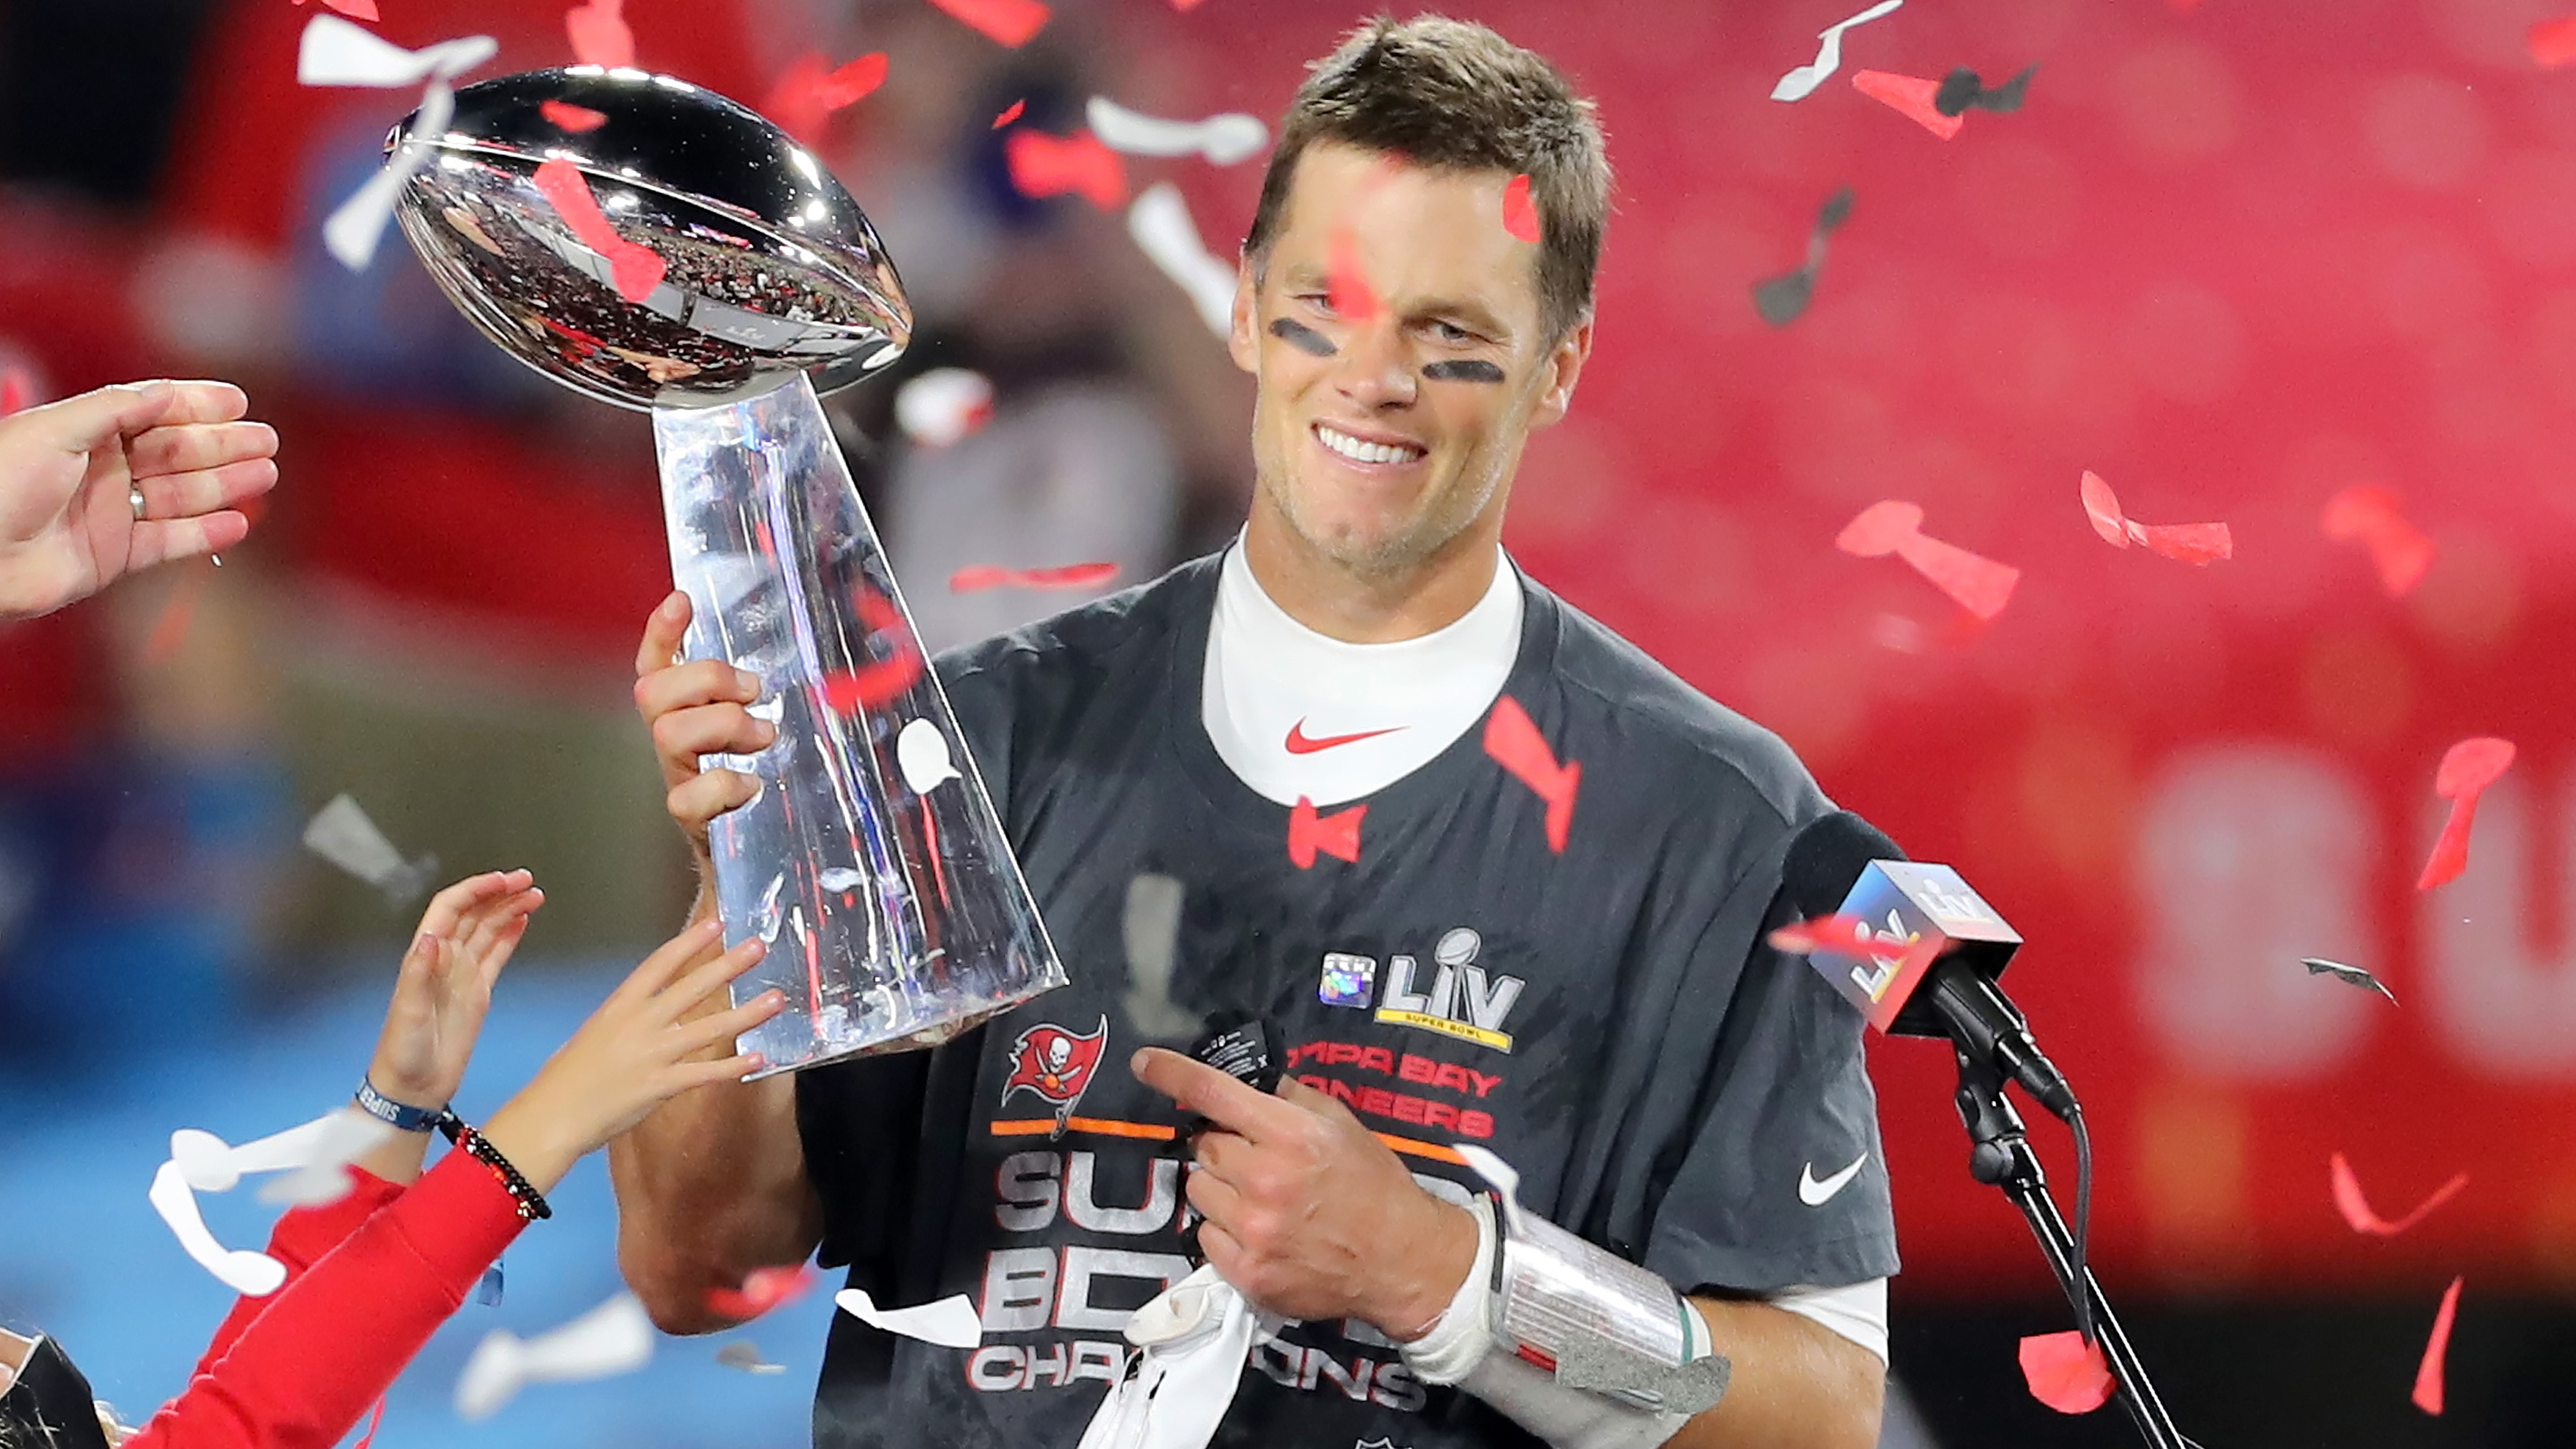 Tom Brady of the Tampa Bay Buccaneers with the Super Bowl trophy